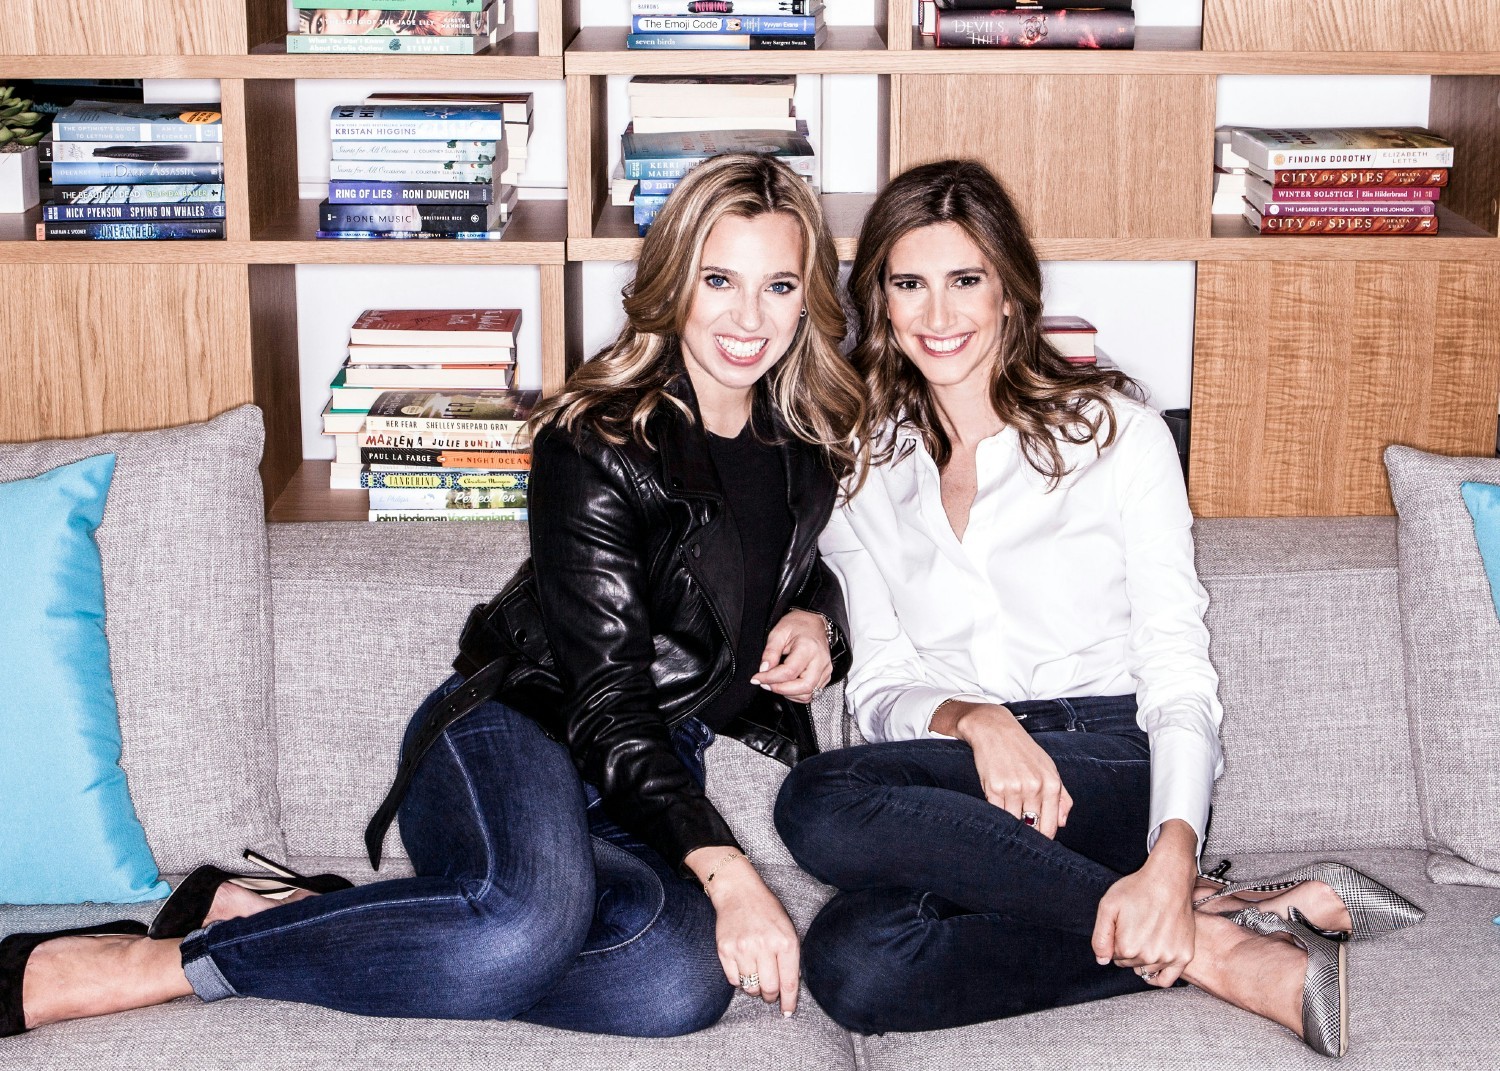 theSkimm co-founders and co-CEOs Danielle Weisberg and Carly Zakin